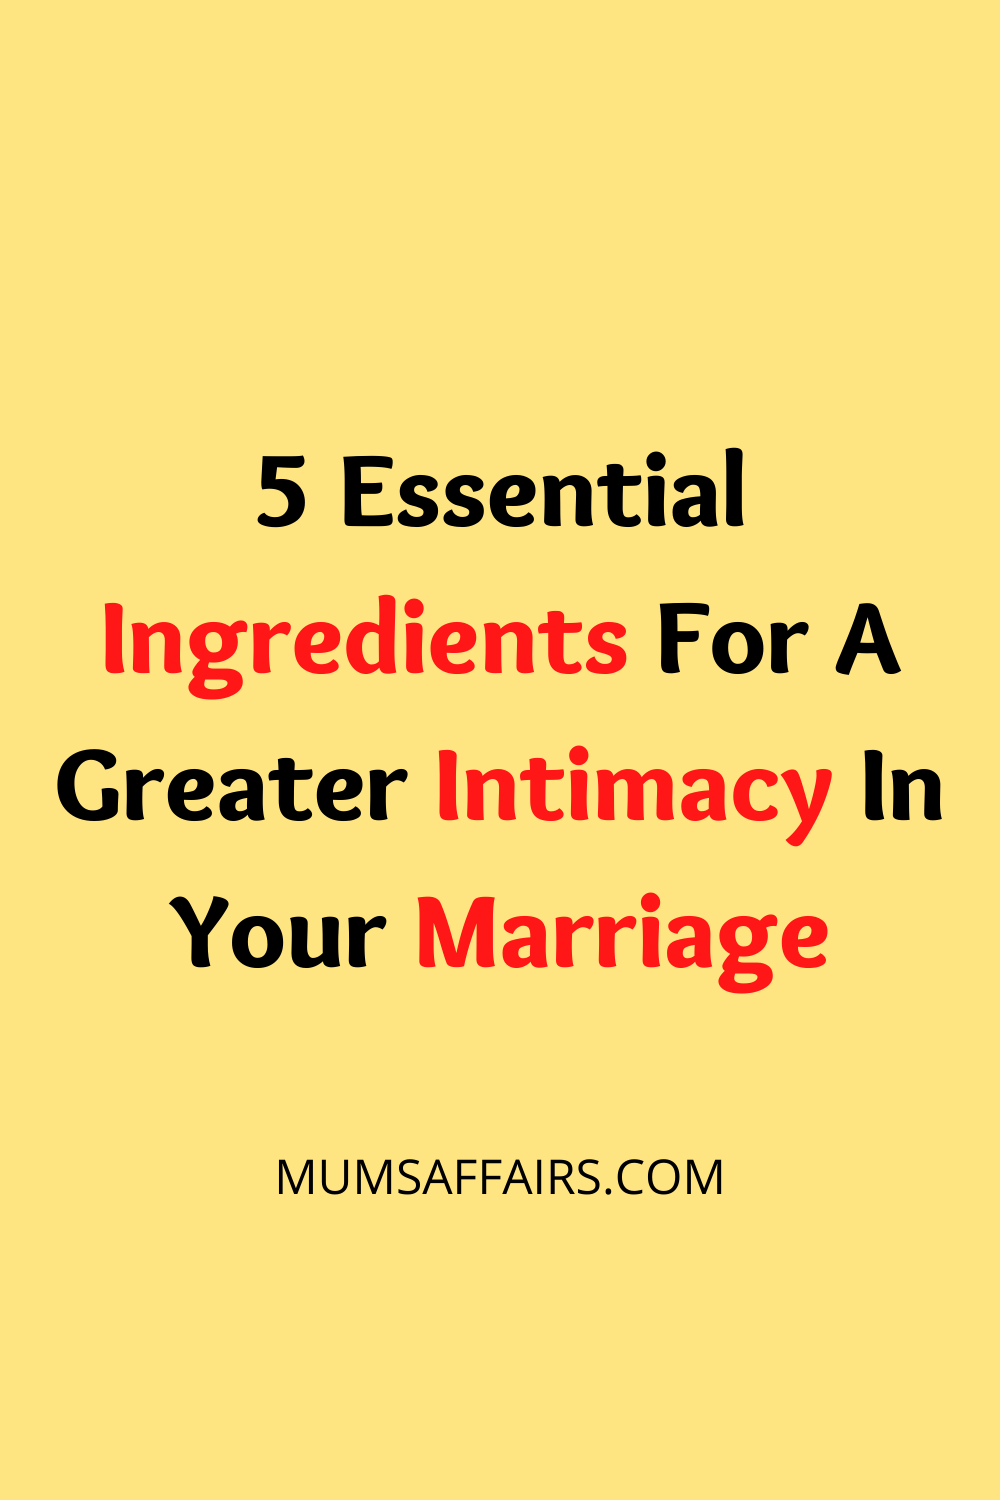 Ingredients For A Greater Intimacy In Your Marriage